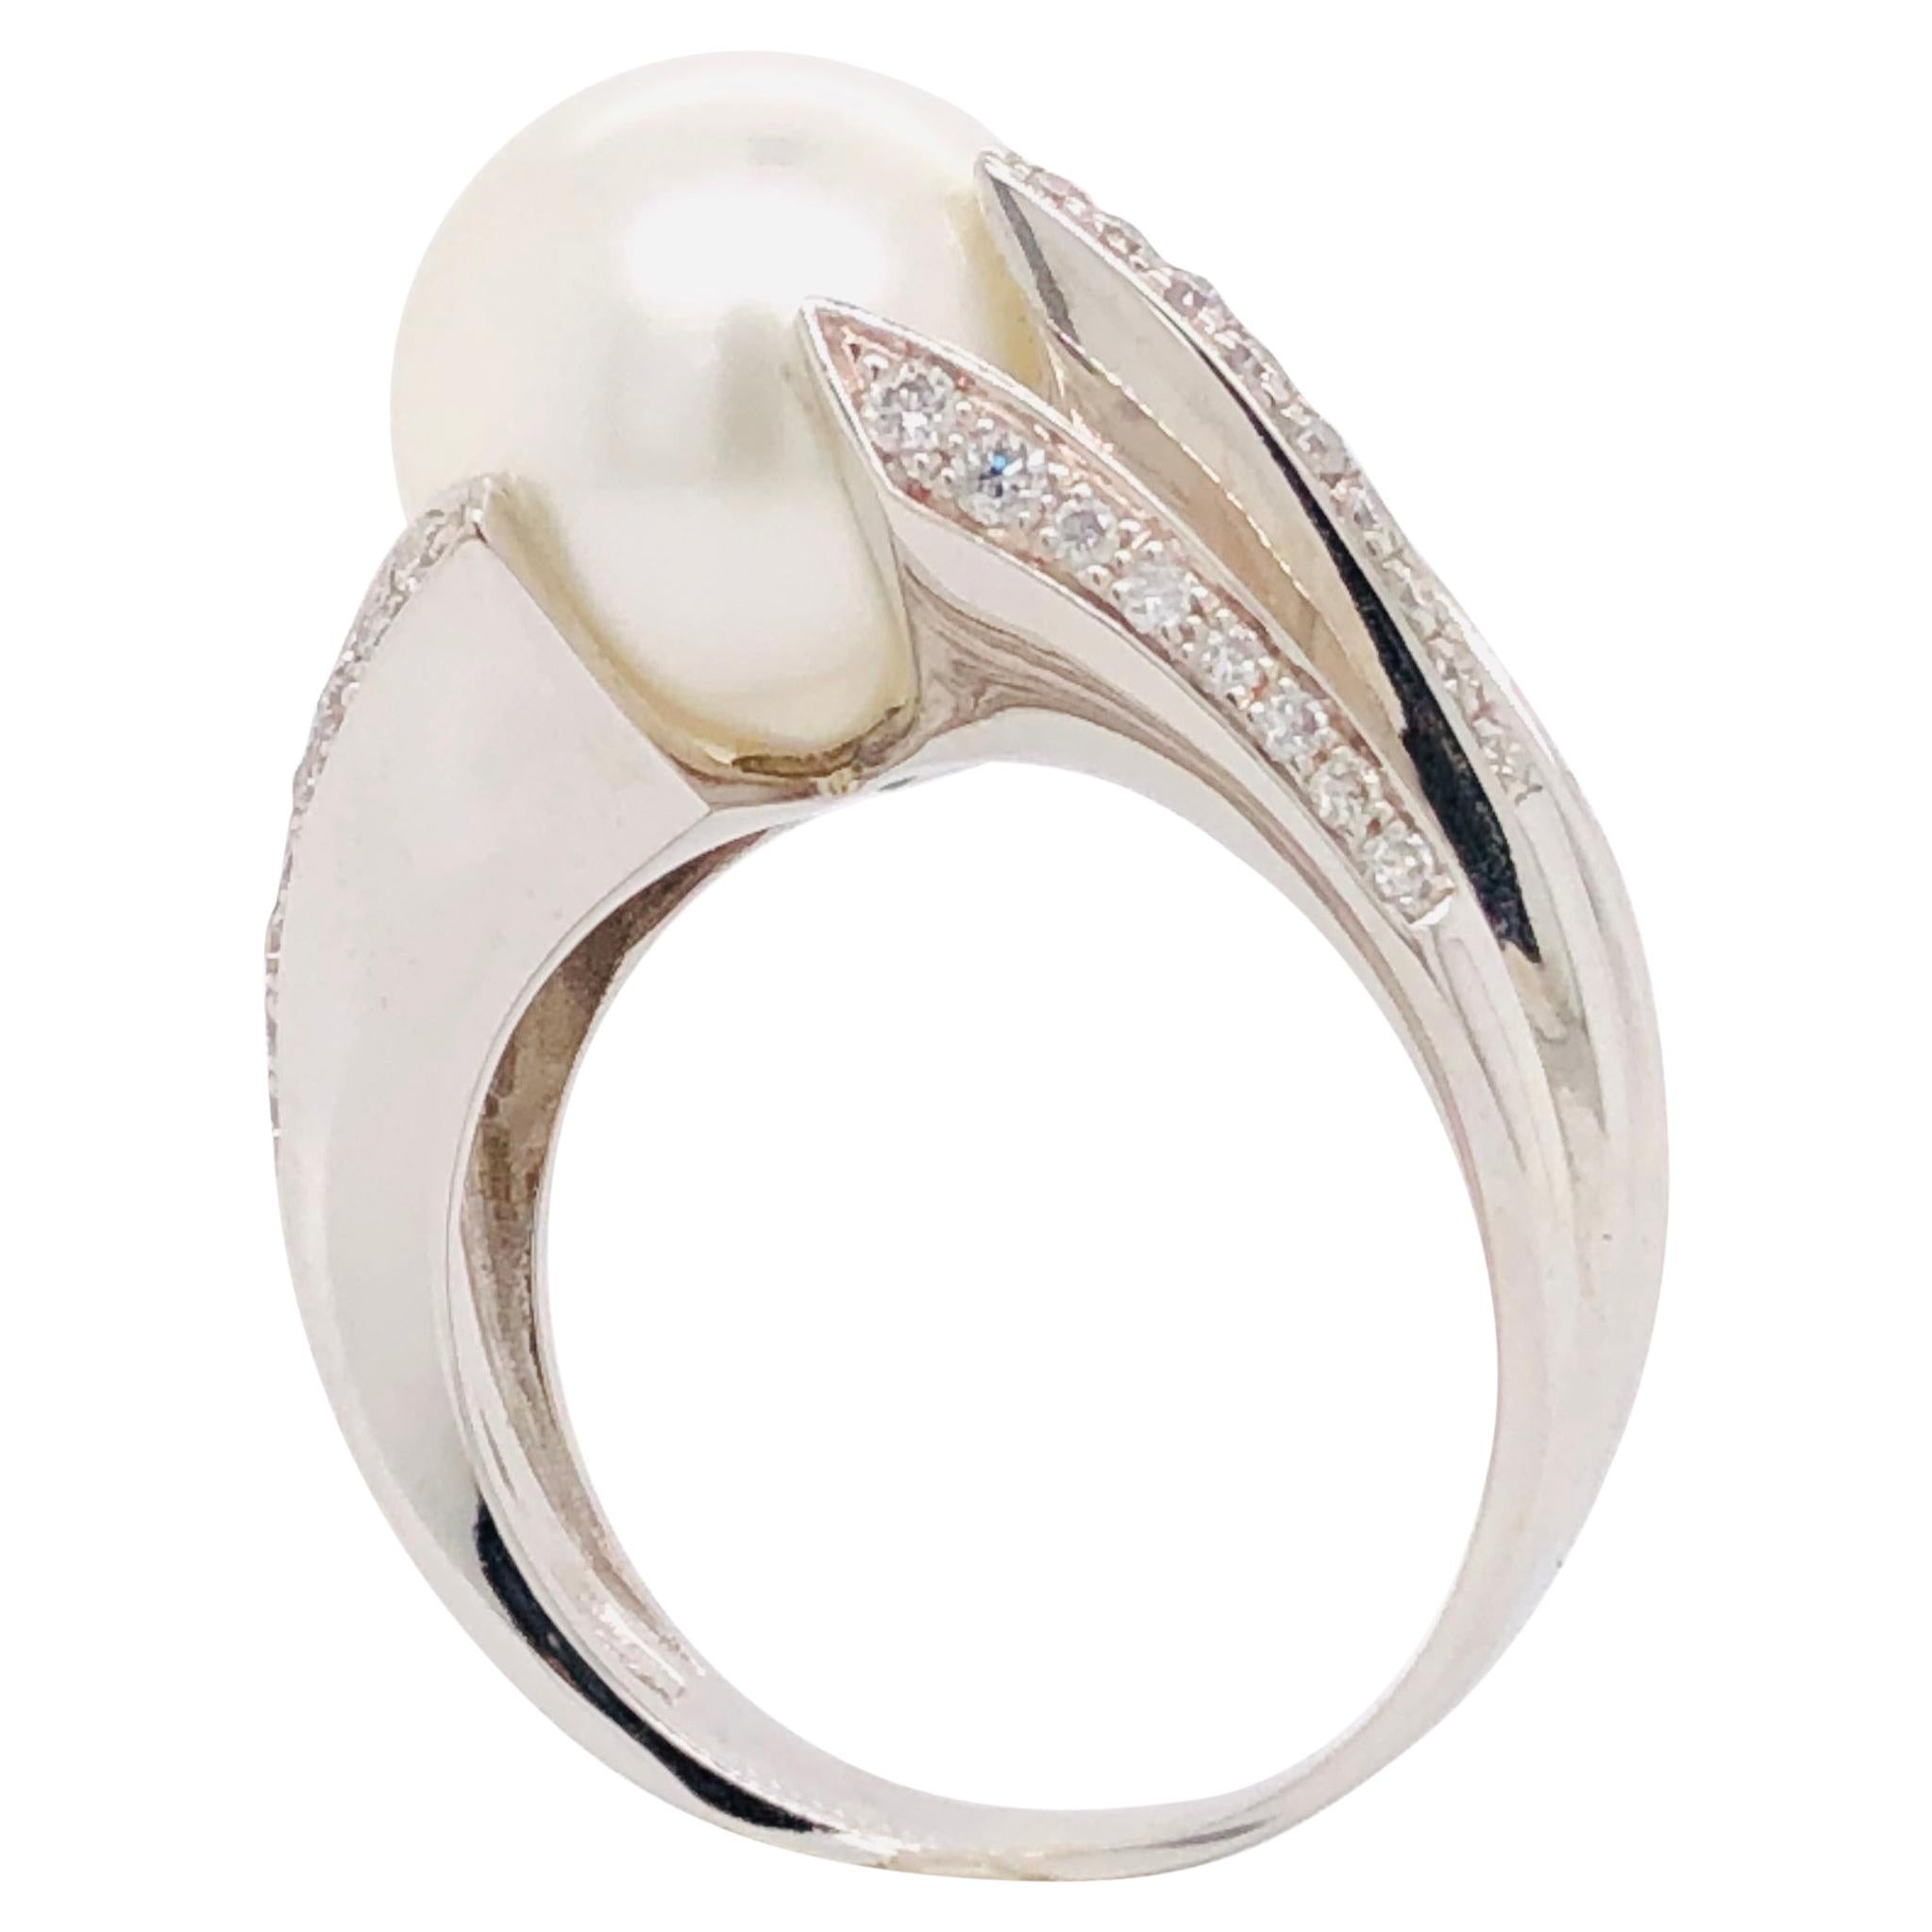 Magnificent ring in 18 carat white gold, highlighting a sparkling white cultured pearl accompanied by a sumptuous pavé of white diamonds. This exquisite piece embodies timeless elegance and refined sparkle.

The cultured pearl, with an impressive